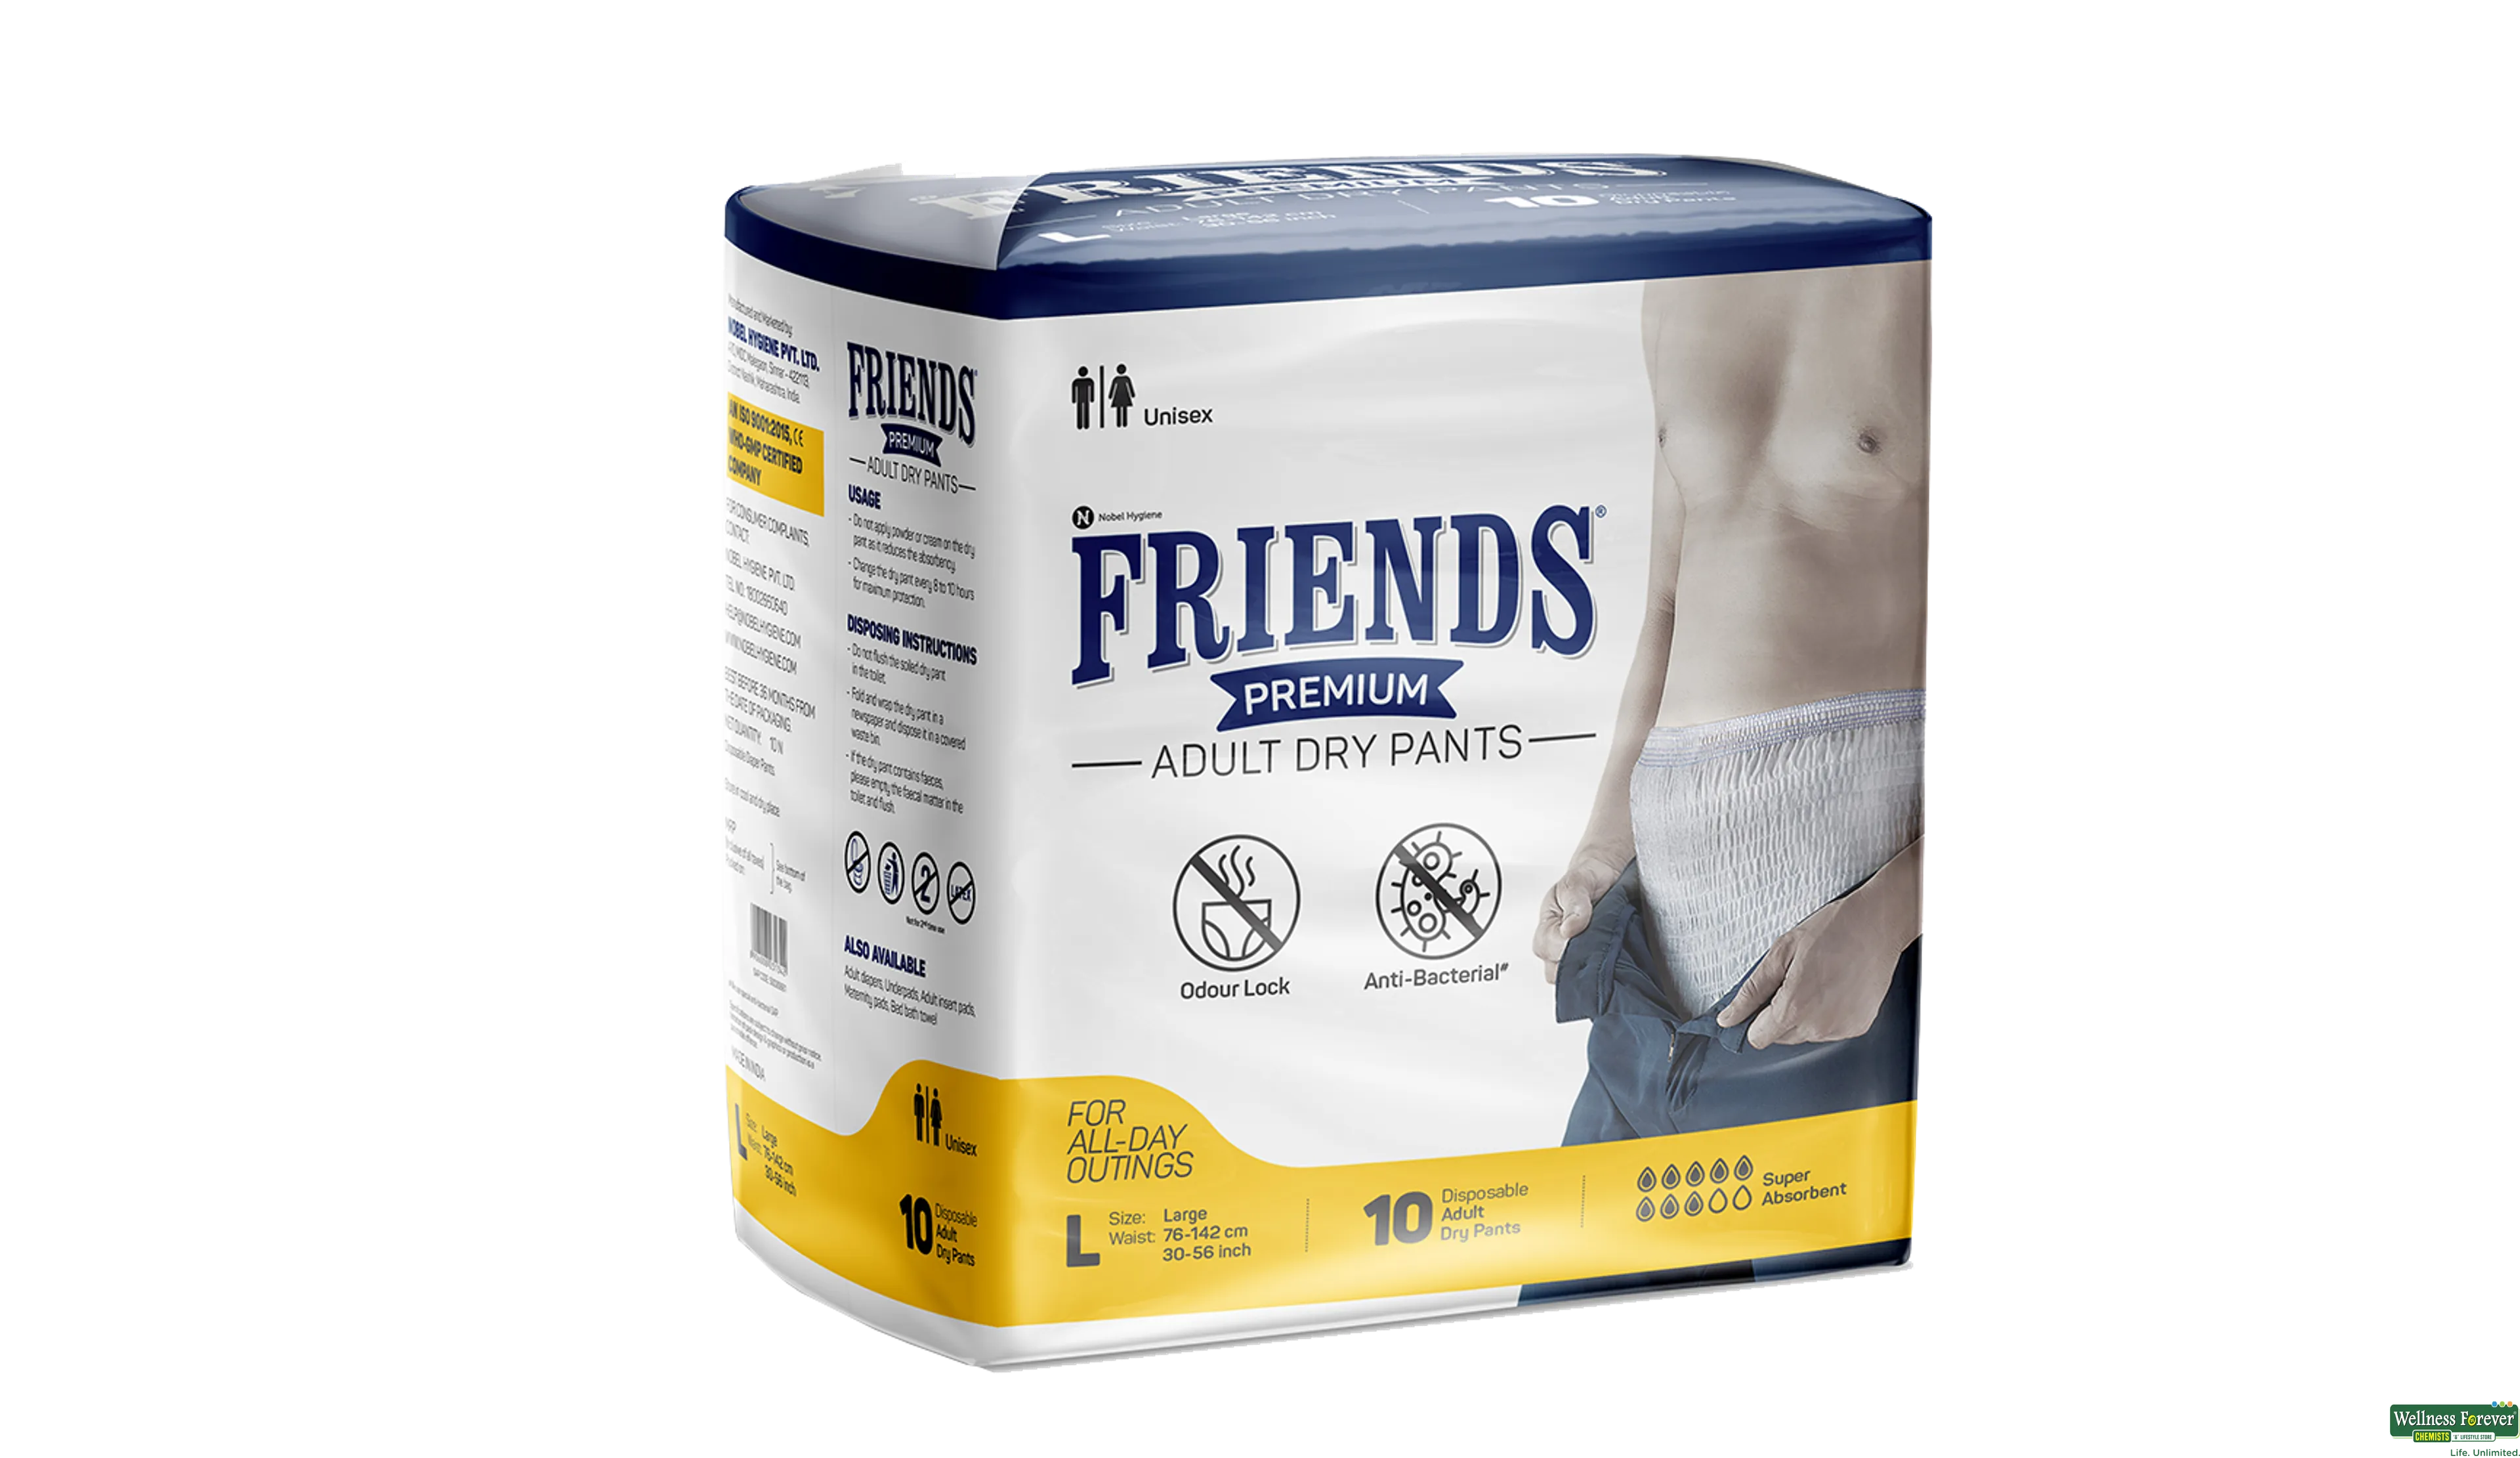 Lifree Extra Absorb Adult Diaper Pants Unisex, Medium (M), 10 Pieces, Waist  size (60-85 cm 24-33 Inches) (Pack of 1) : Amazon.in: Health & Personal Care